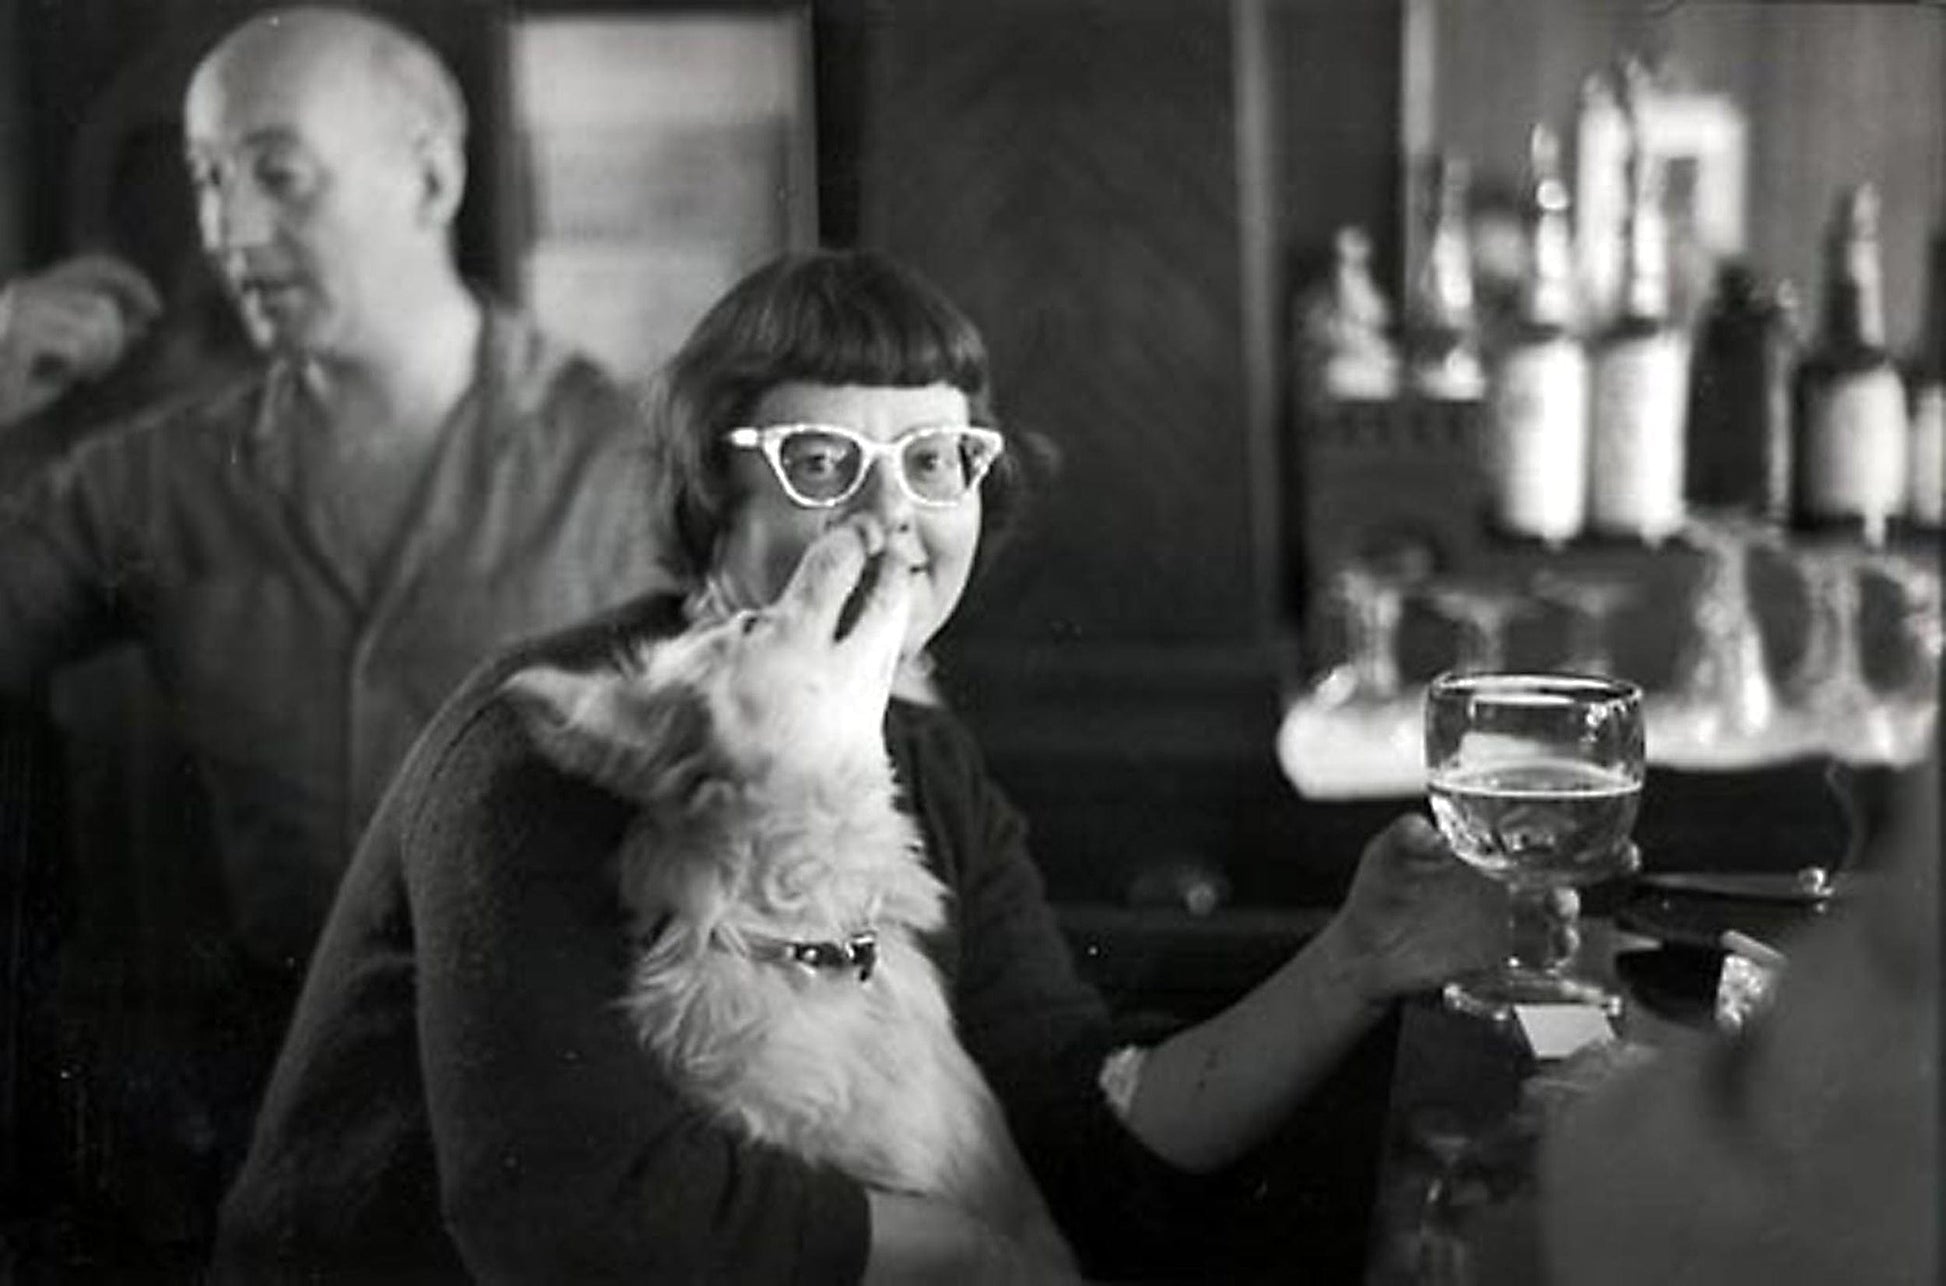 Brent Hannon photo Betty and Dog Sausalito, CA 1953 Art Works Gallery